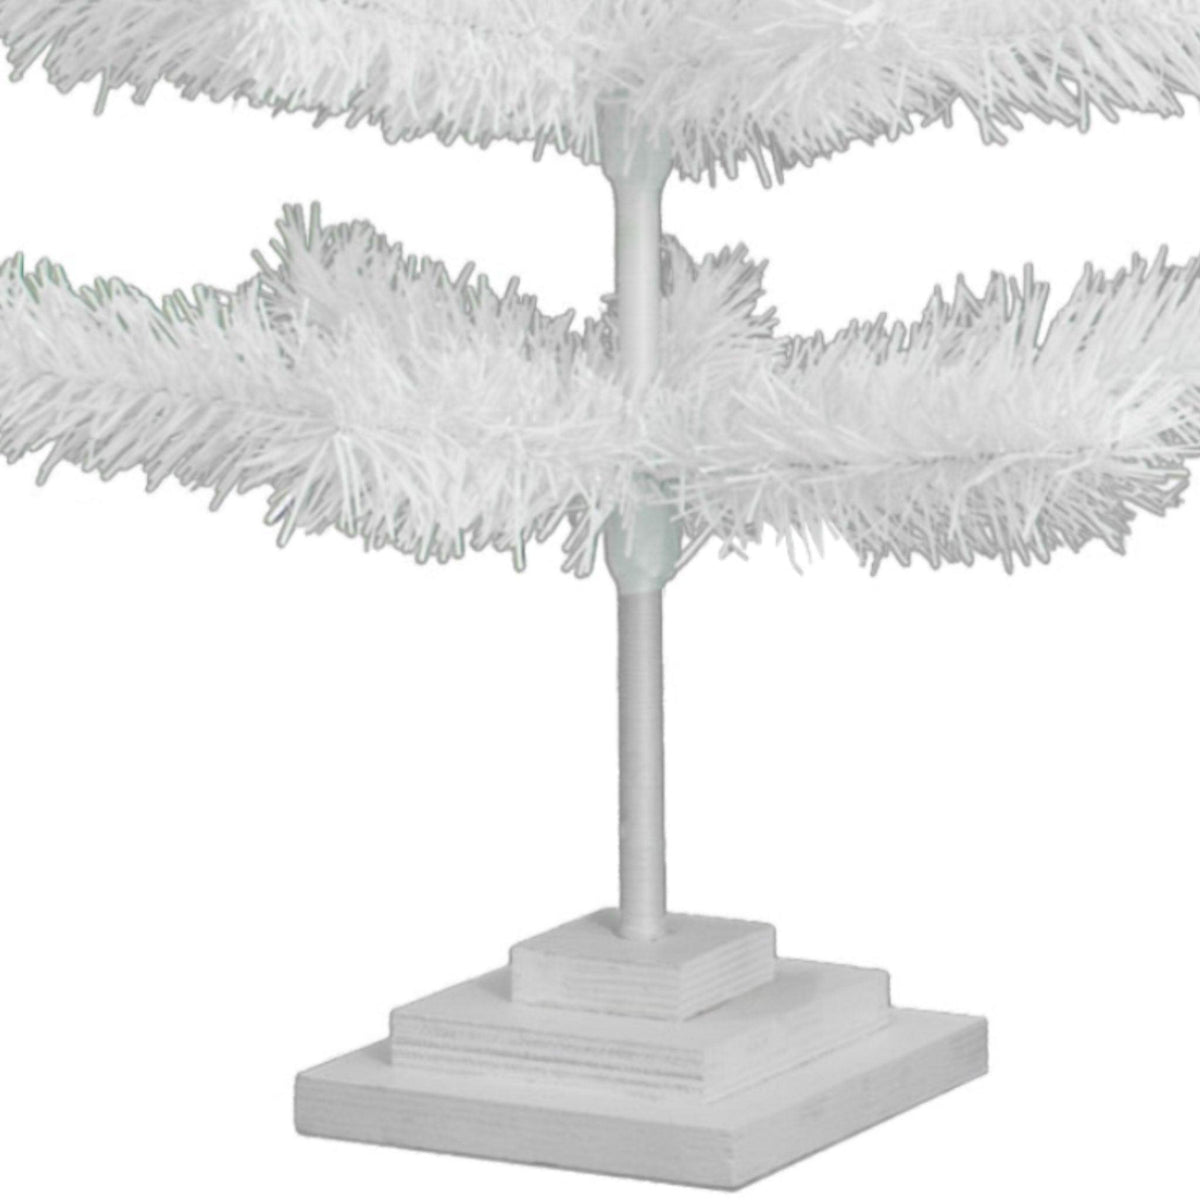 White Tinsel Trees come with a wooden 3-tiered base painted in white.  Stands are detachable and sturdy.  Shop now at leedisplay.com